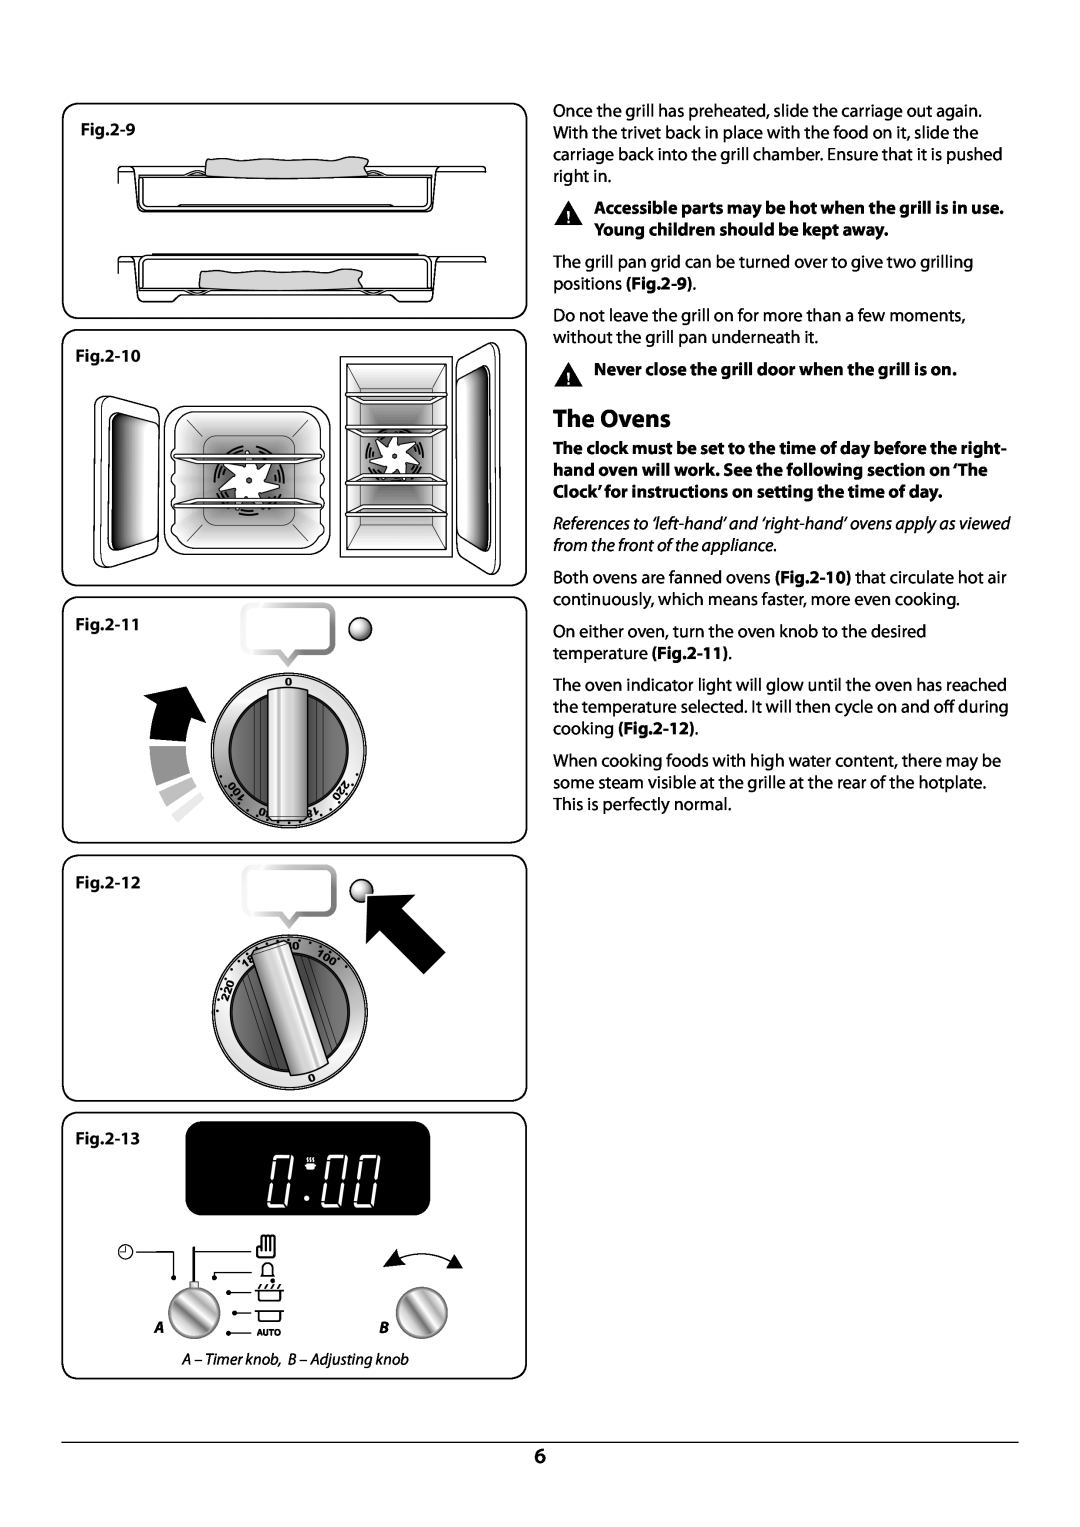 Rangemaster U109941 - 02 manual The Ovens, 11, 12, 13,  Never close the grill door when the grill is on 